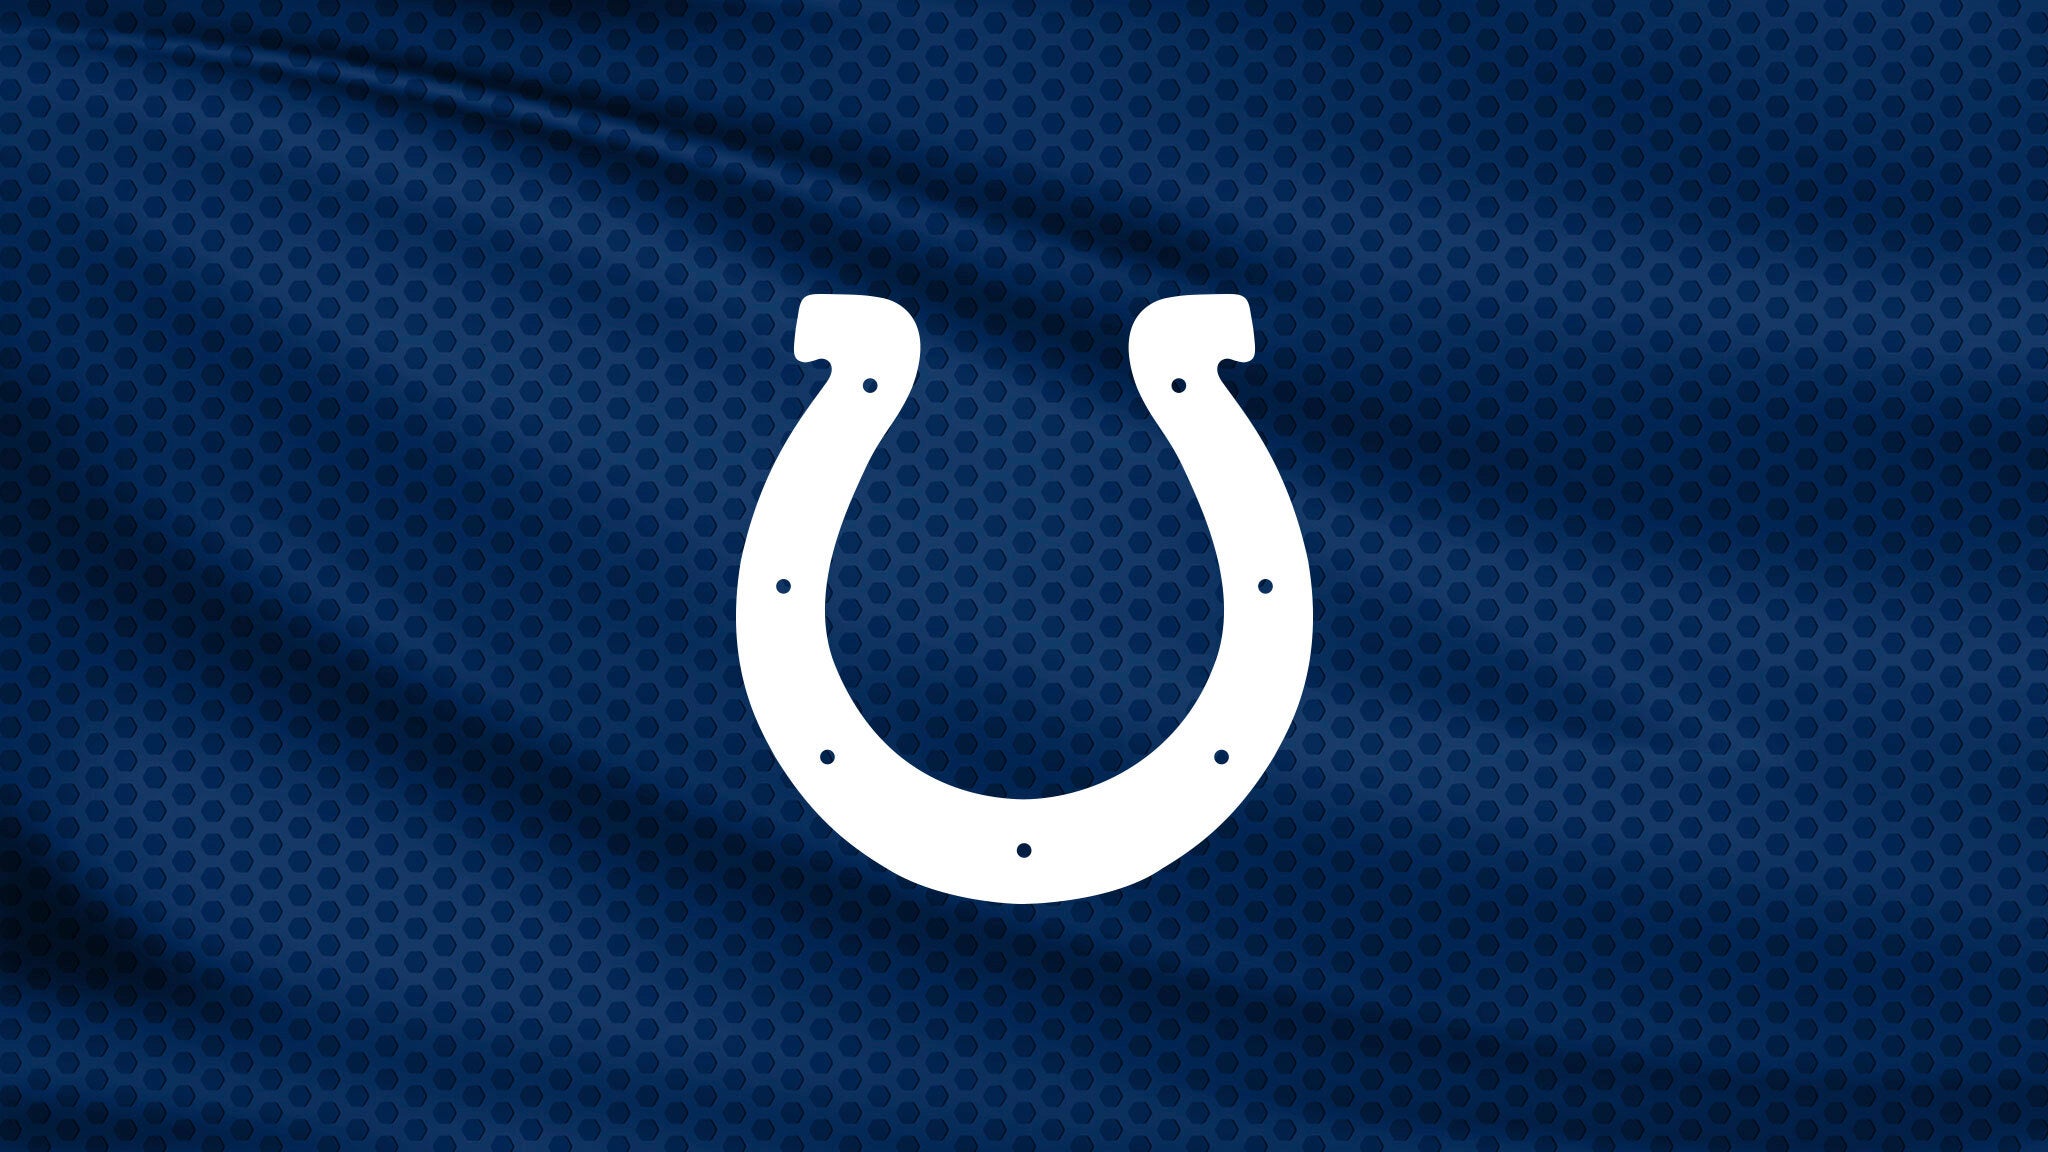 Indianapolis Colts vs. Jacksonville Jaguars in Indianapolis promo photo for Colts VIP presale offer code